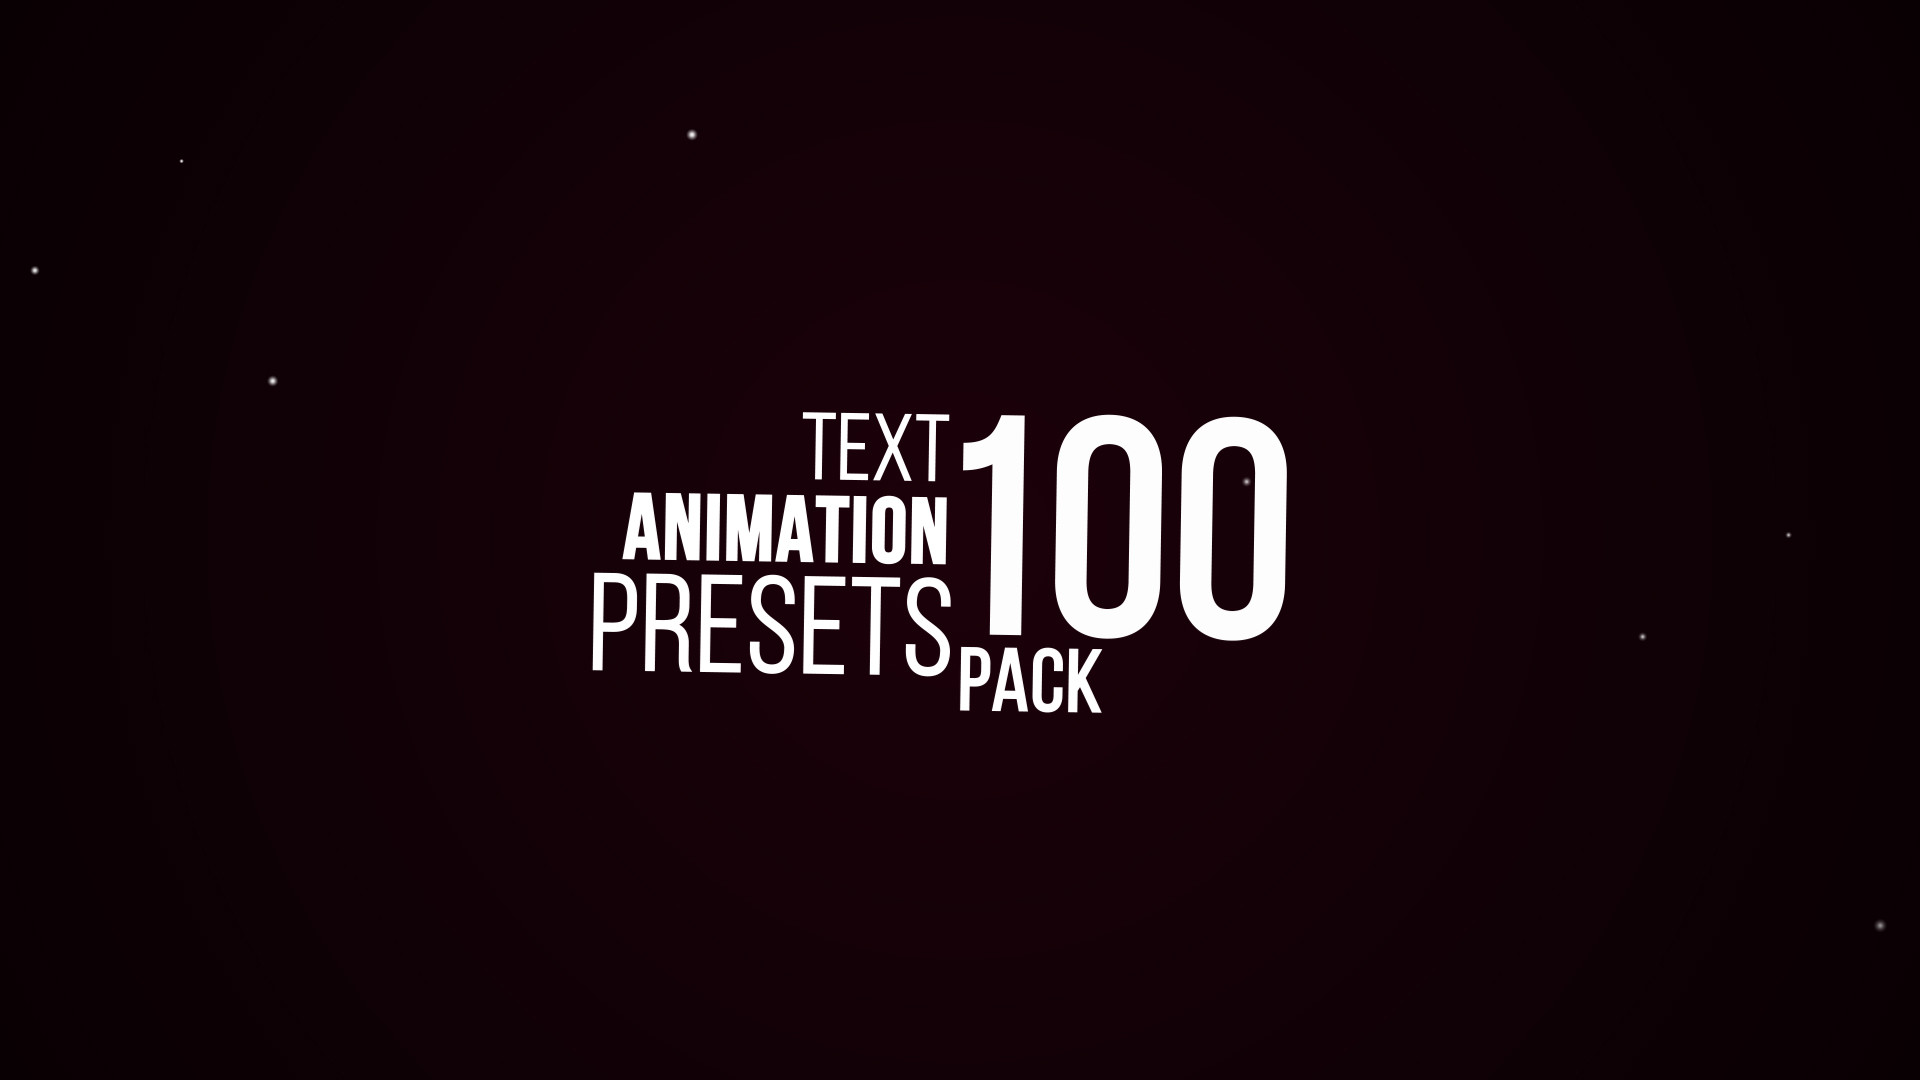 animation presets after effects cs6 download